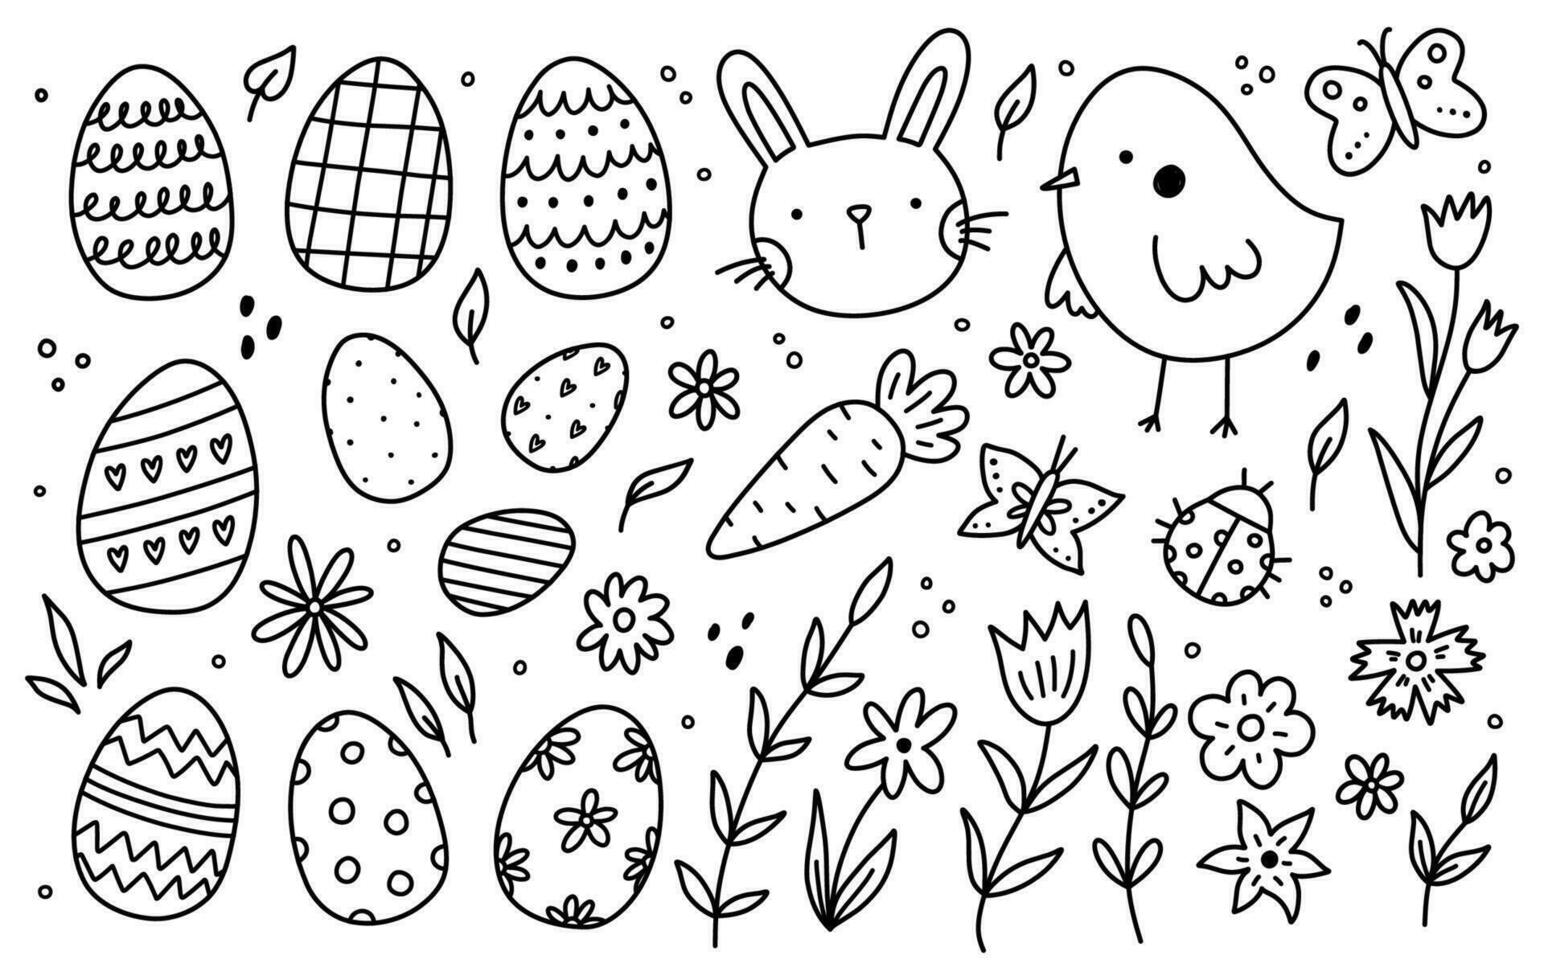 Cute doodle set with decorated Easter eggs, spring flowers, insects, funny chick and bunny isolated on white background. Vector hand-drawn illustration. Perfect for holiday designs, decorations.